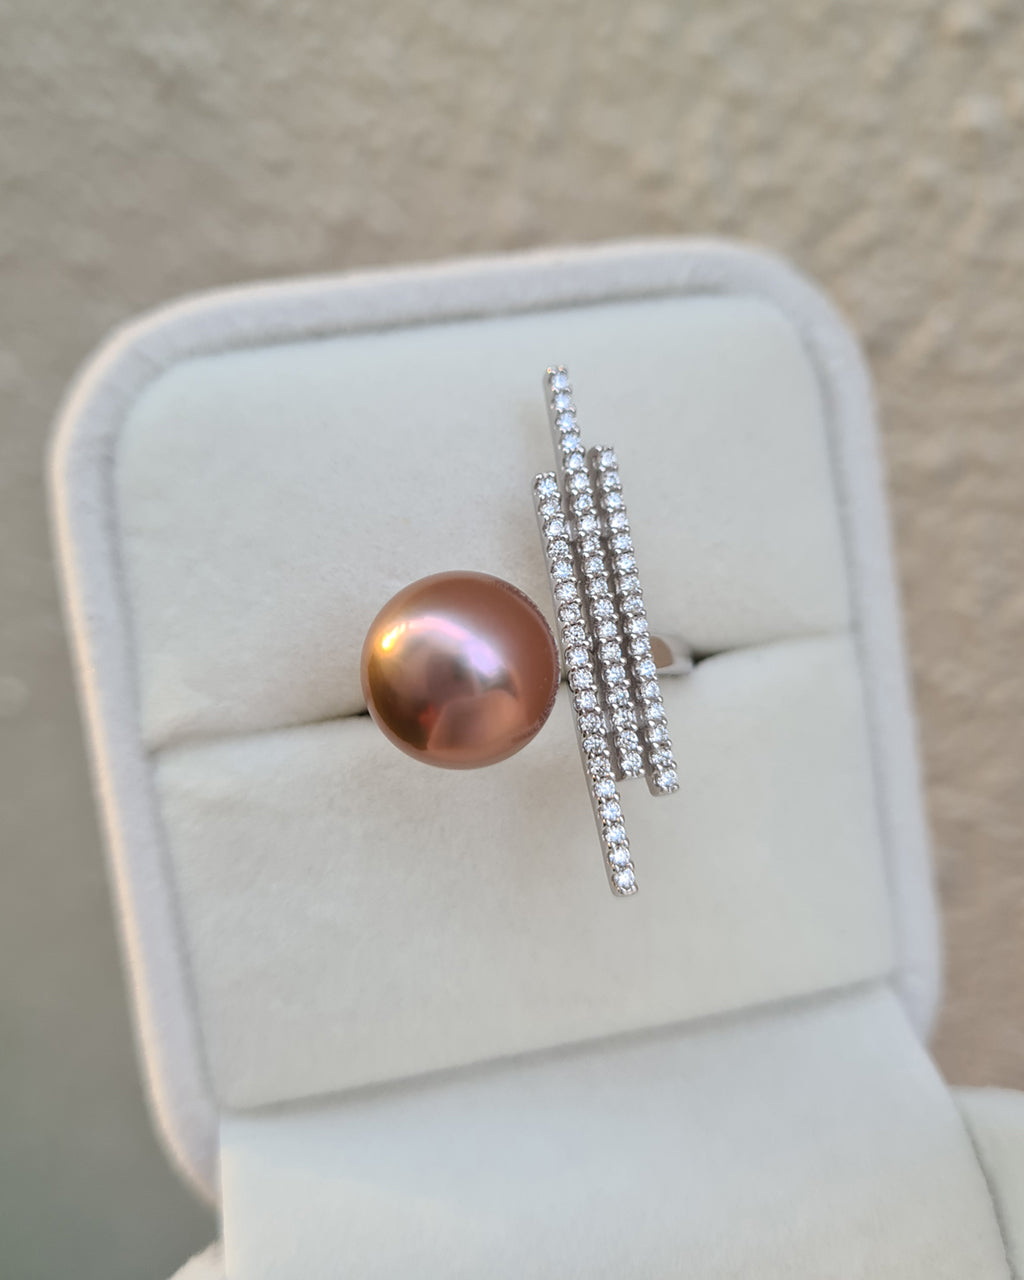 Edison Pearl Ring | Metallic Purple Pearl Open Ring | Contemporary Affordable Pearl Jewelry